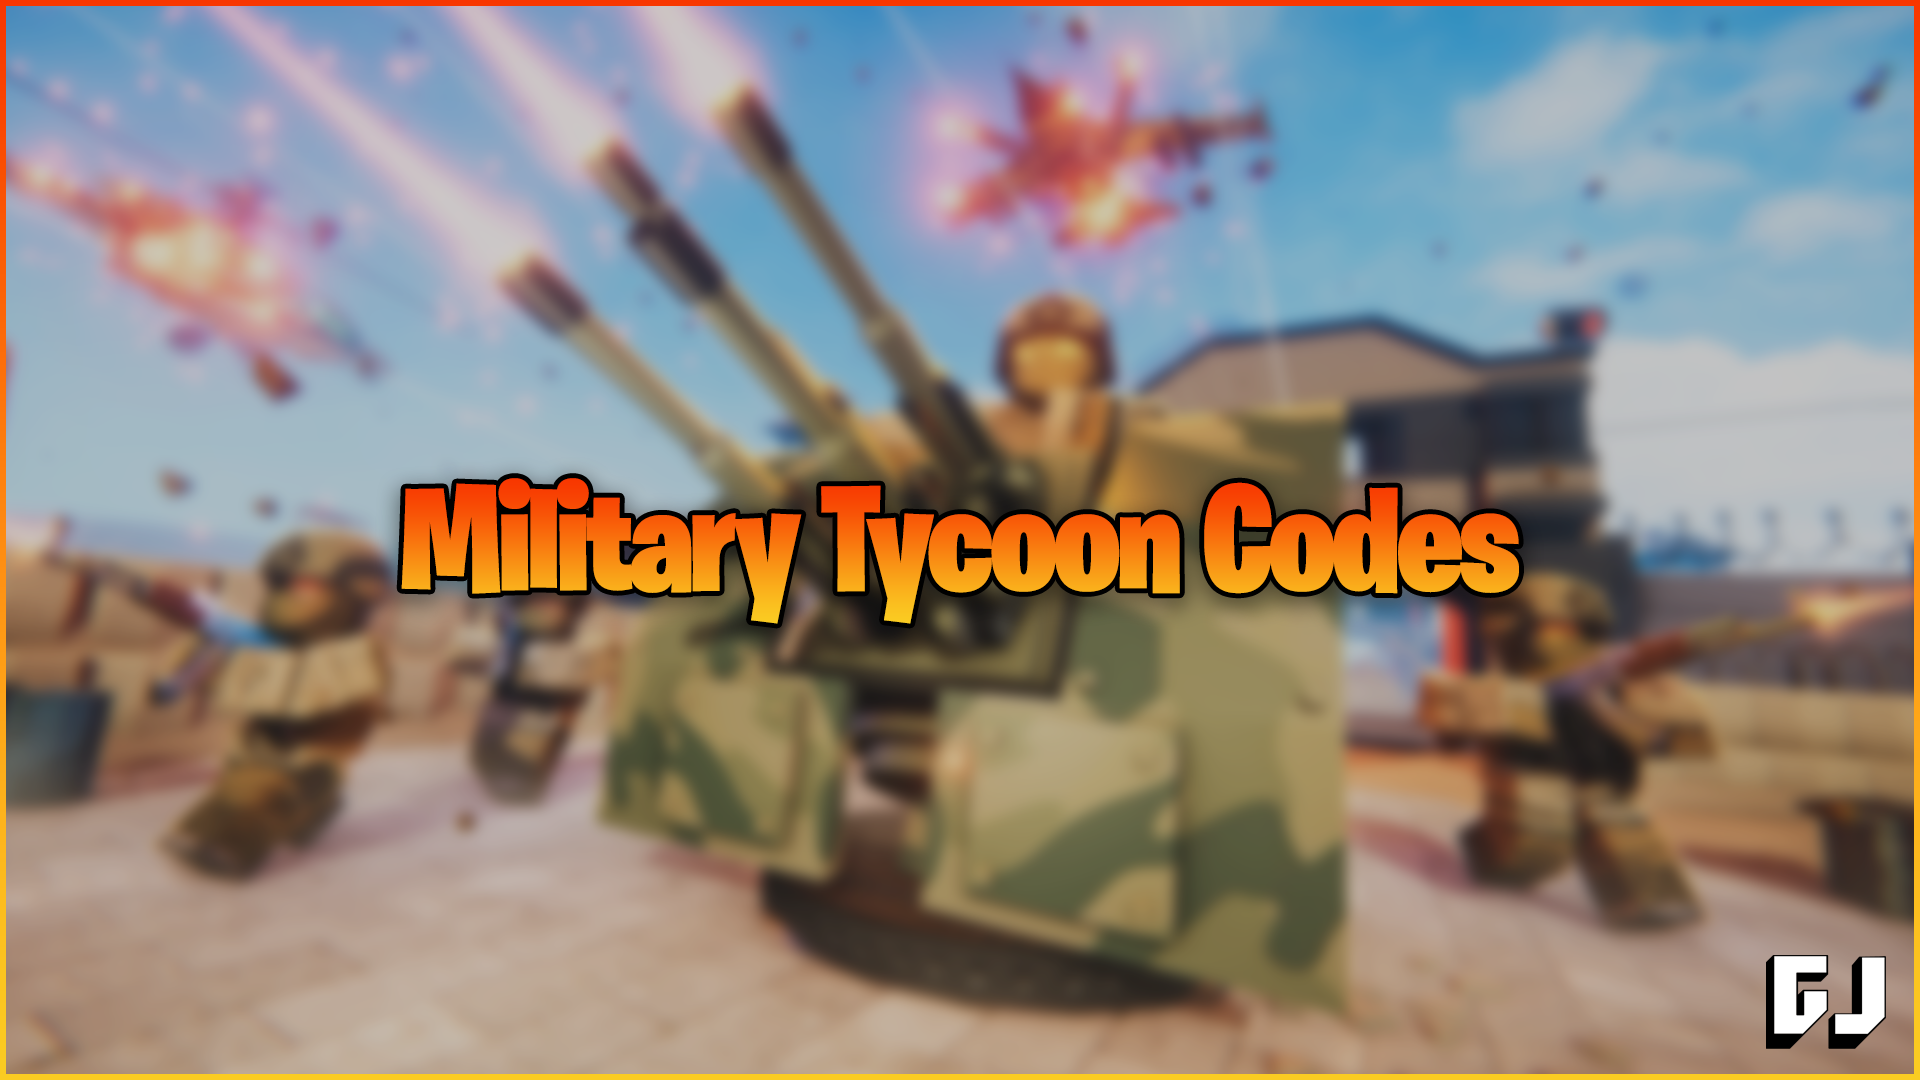 2021) ALL NEW *WORLD WAR* UPDATE OP CODES! Roblox Military Tycoon codes 